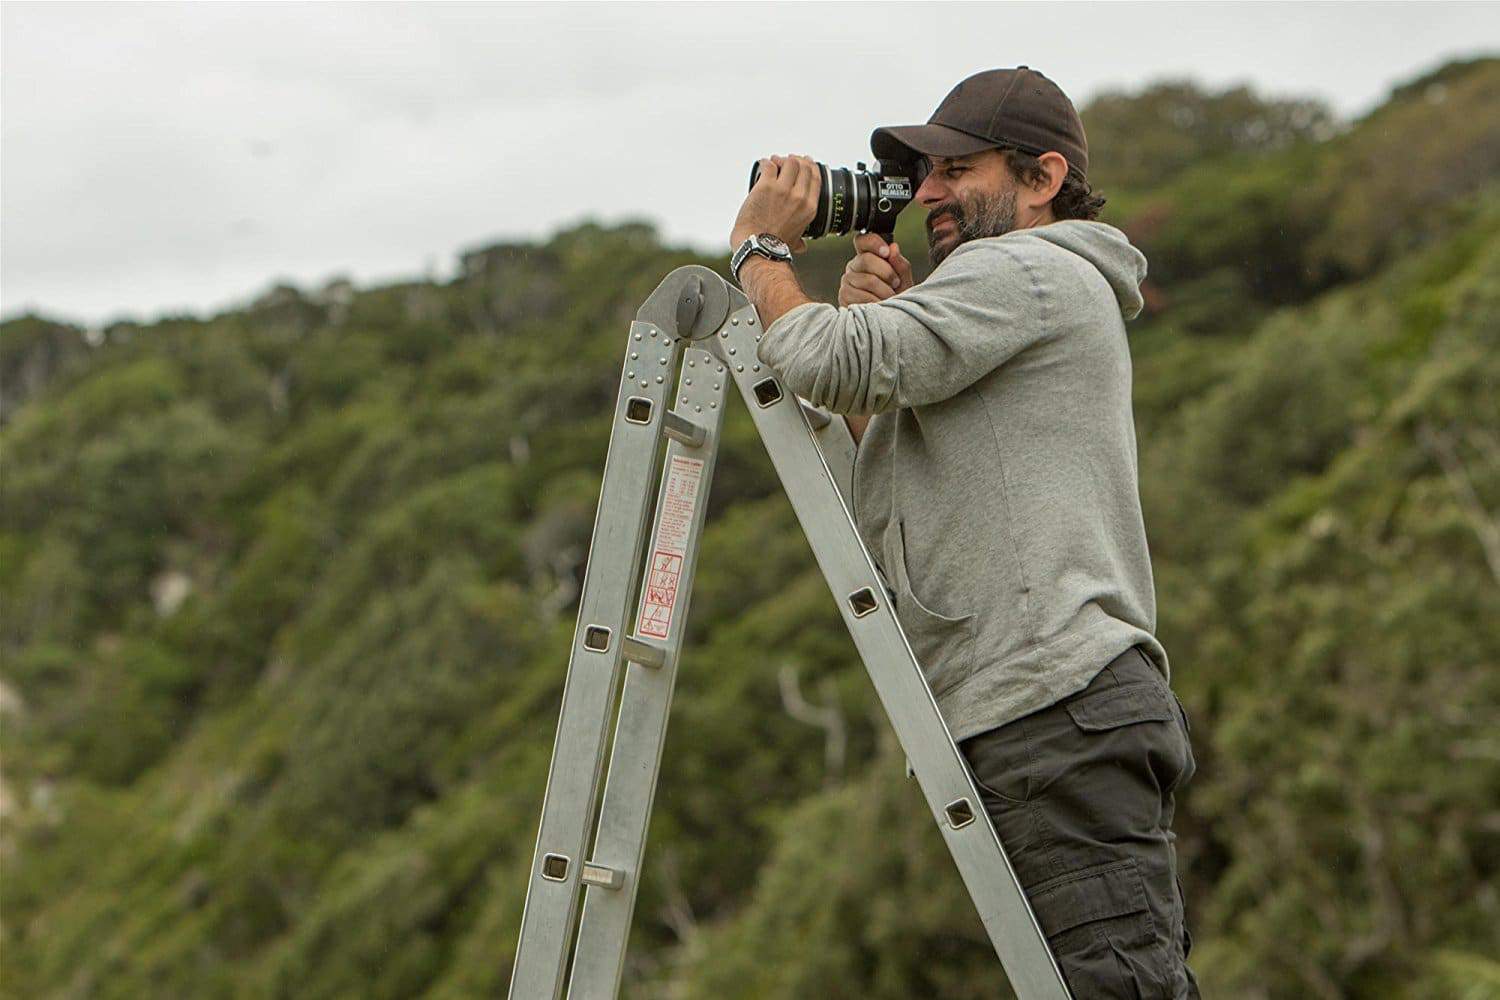 Jaume Collet Serra Directing The Shallows